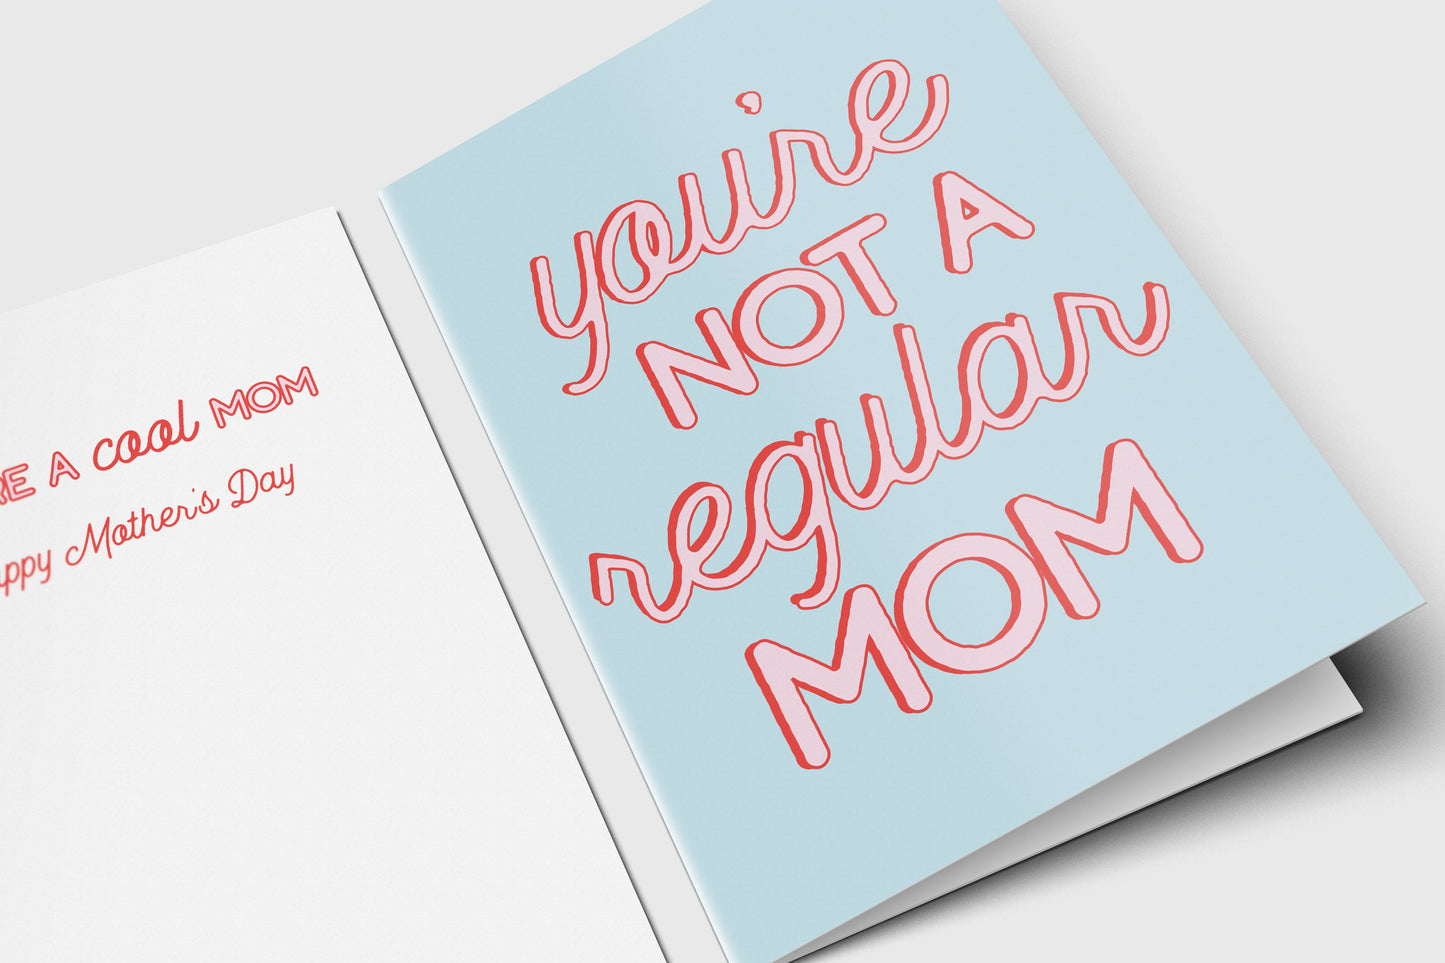 Mother's Day Card | You're Not A Regular Mom - You're a Cool Mom - For Mom - Folded - Wishing You a Happy Mother's Day - Mother's Day Gift